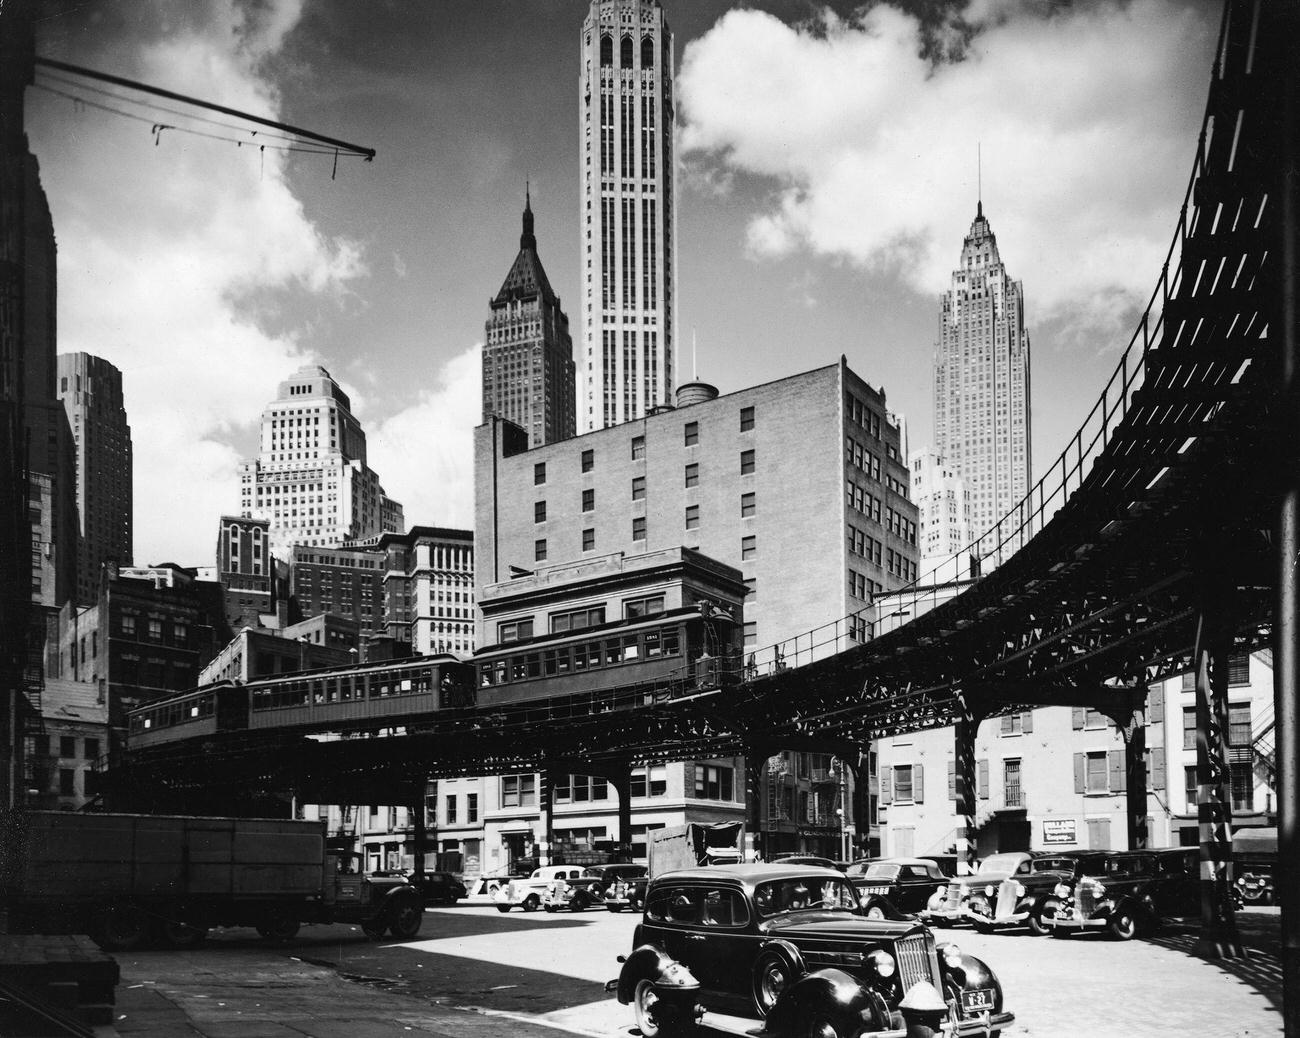 Skyline view of Manhattan's financial district that shows an elevated train line and, at the right, 1930s